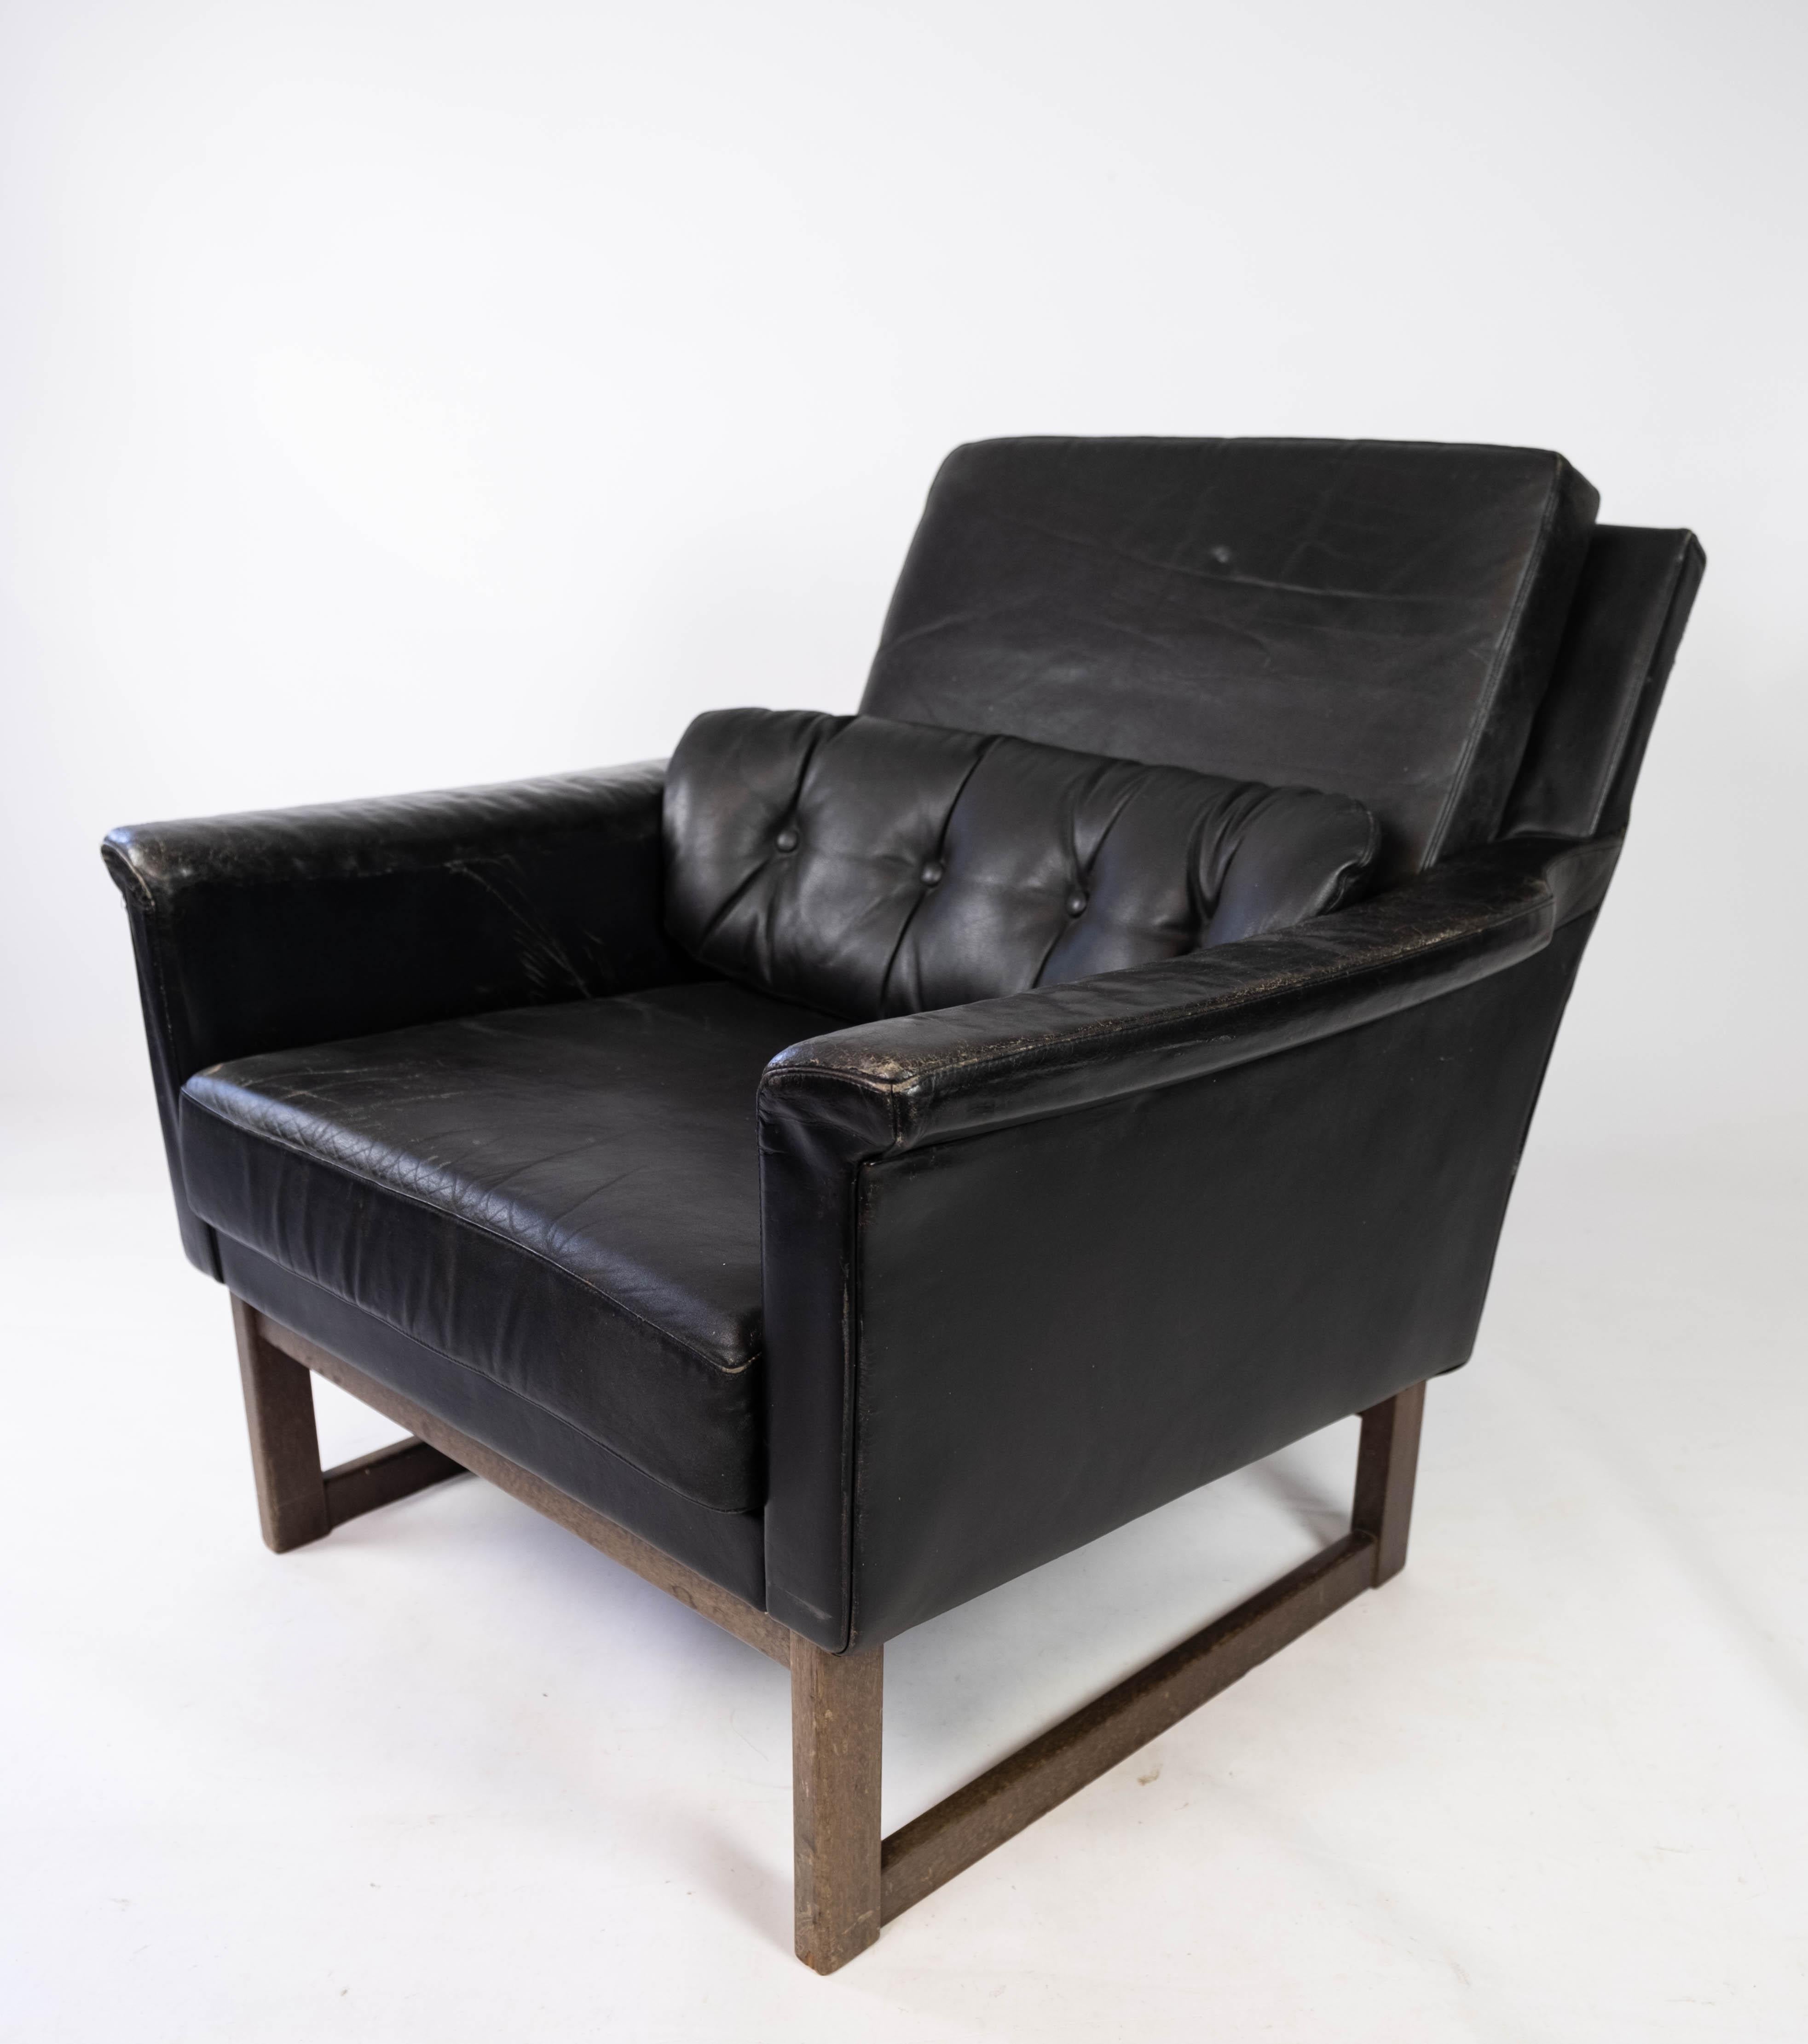 Mid-20th Century Easy Chair Upholstered with Black Leather and Legs in Wood, by Illum Wikkelsø